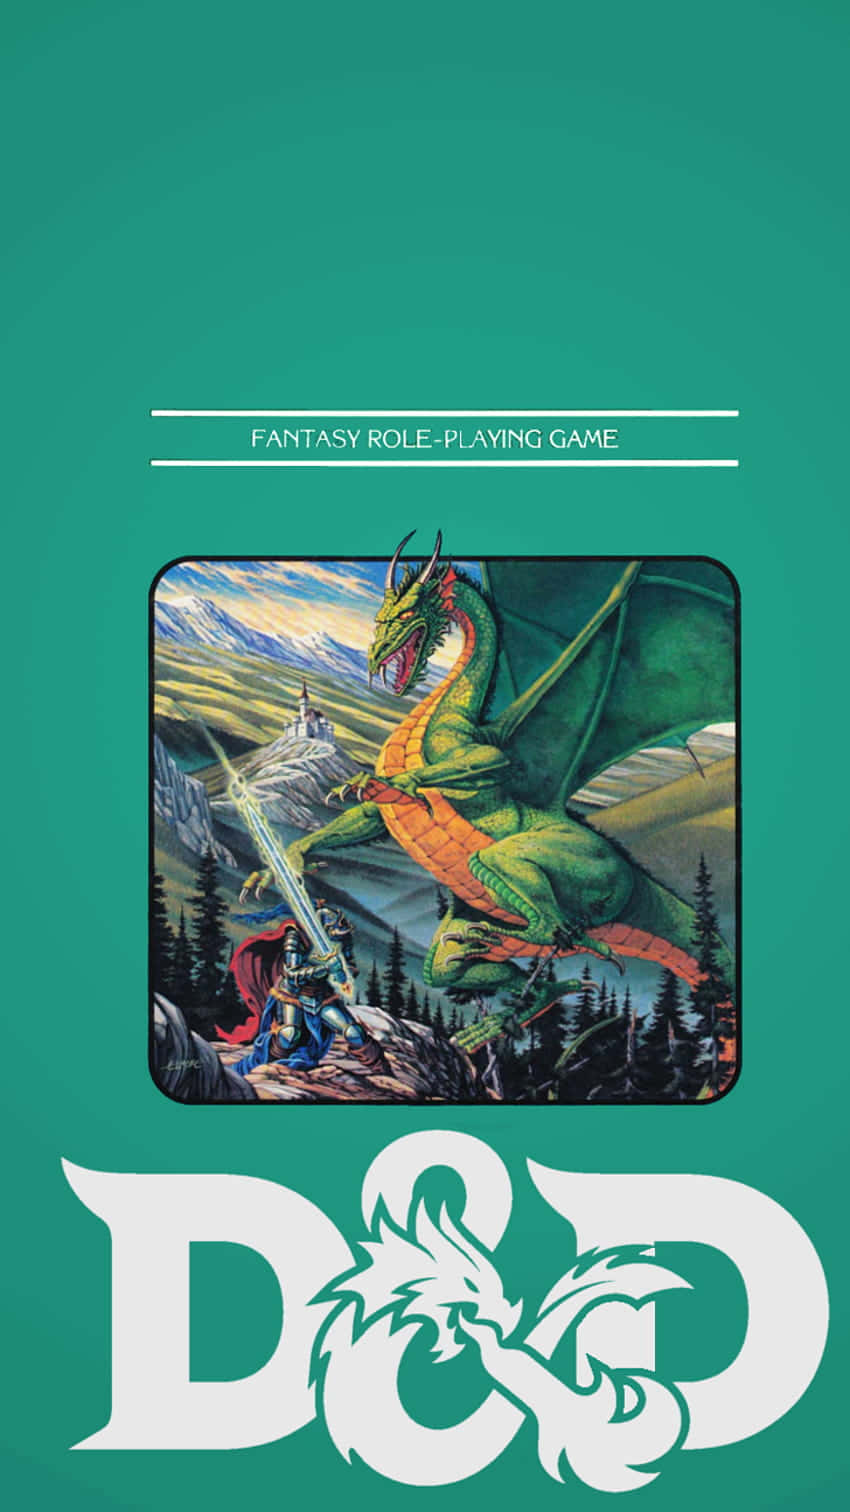 Lose yourself in a world of adventure with Dungeons and Dragons Phone Wallpaper